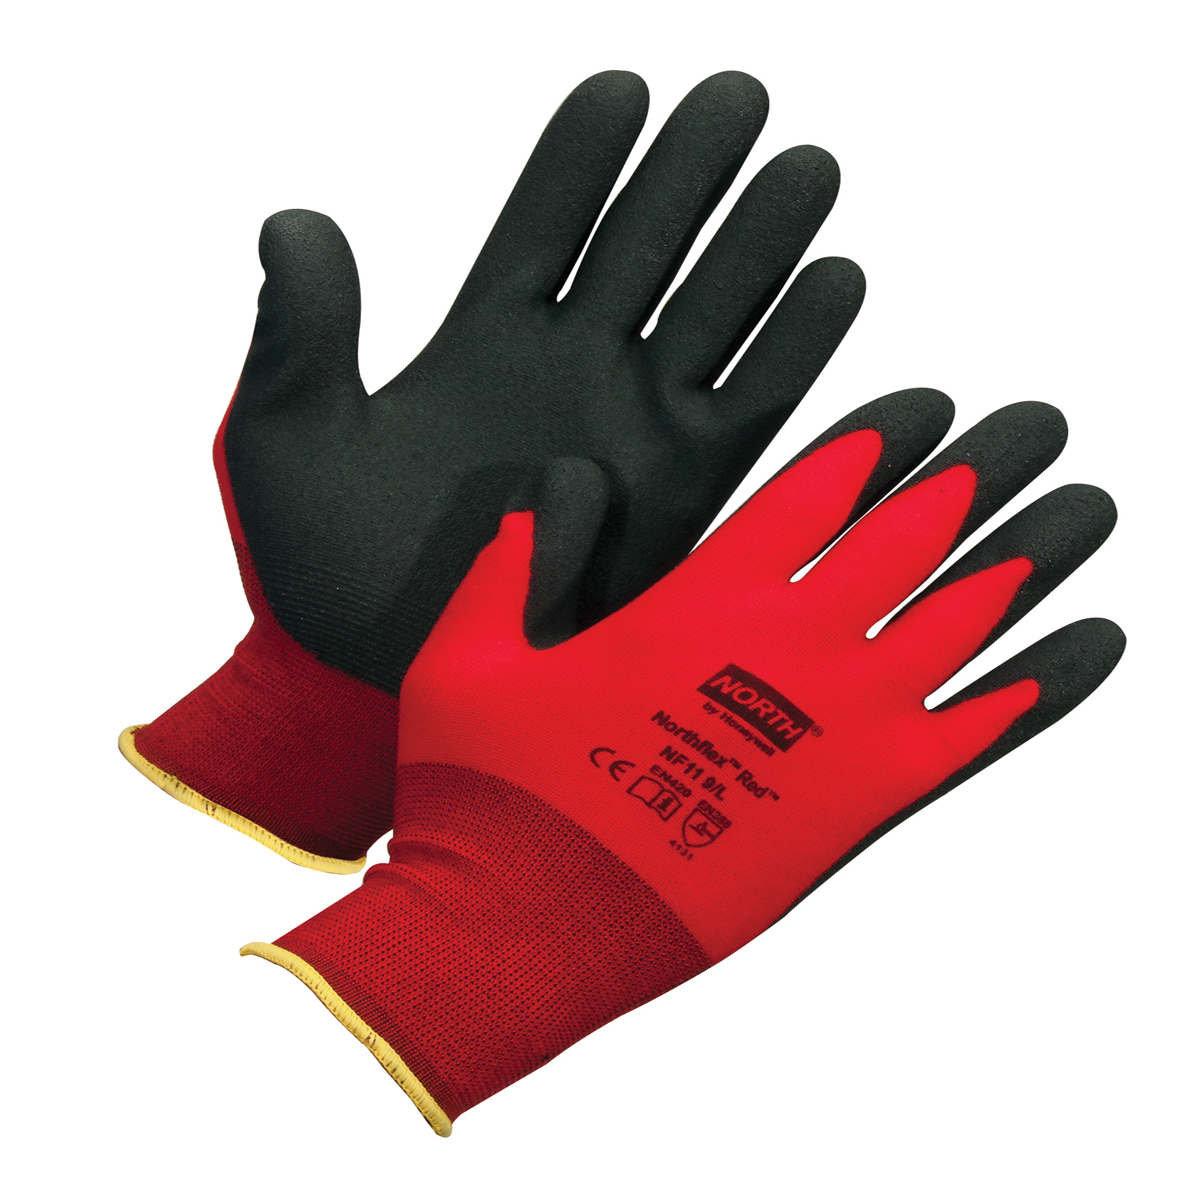 Airgas - HONNF11/8M - Size 8 Medium NorthFlex Red™ NF11 15 Gauge Foam PVC Palm And Fingertips Coated Nylon Liner And Wrist Cuff